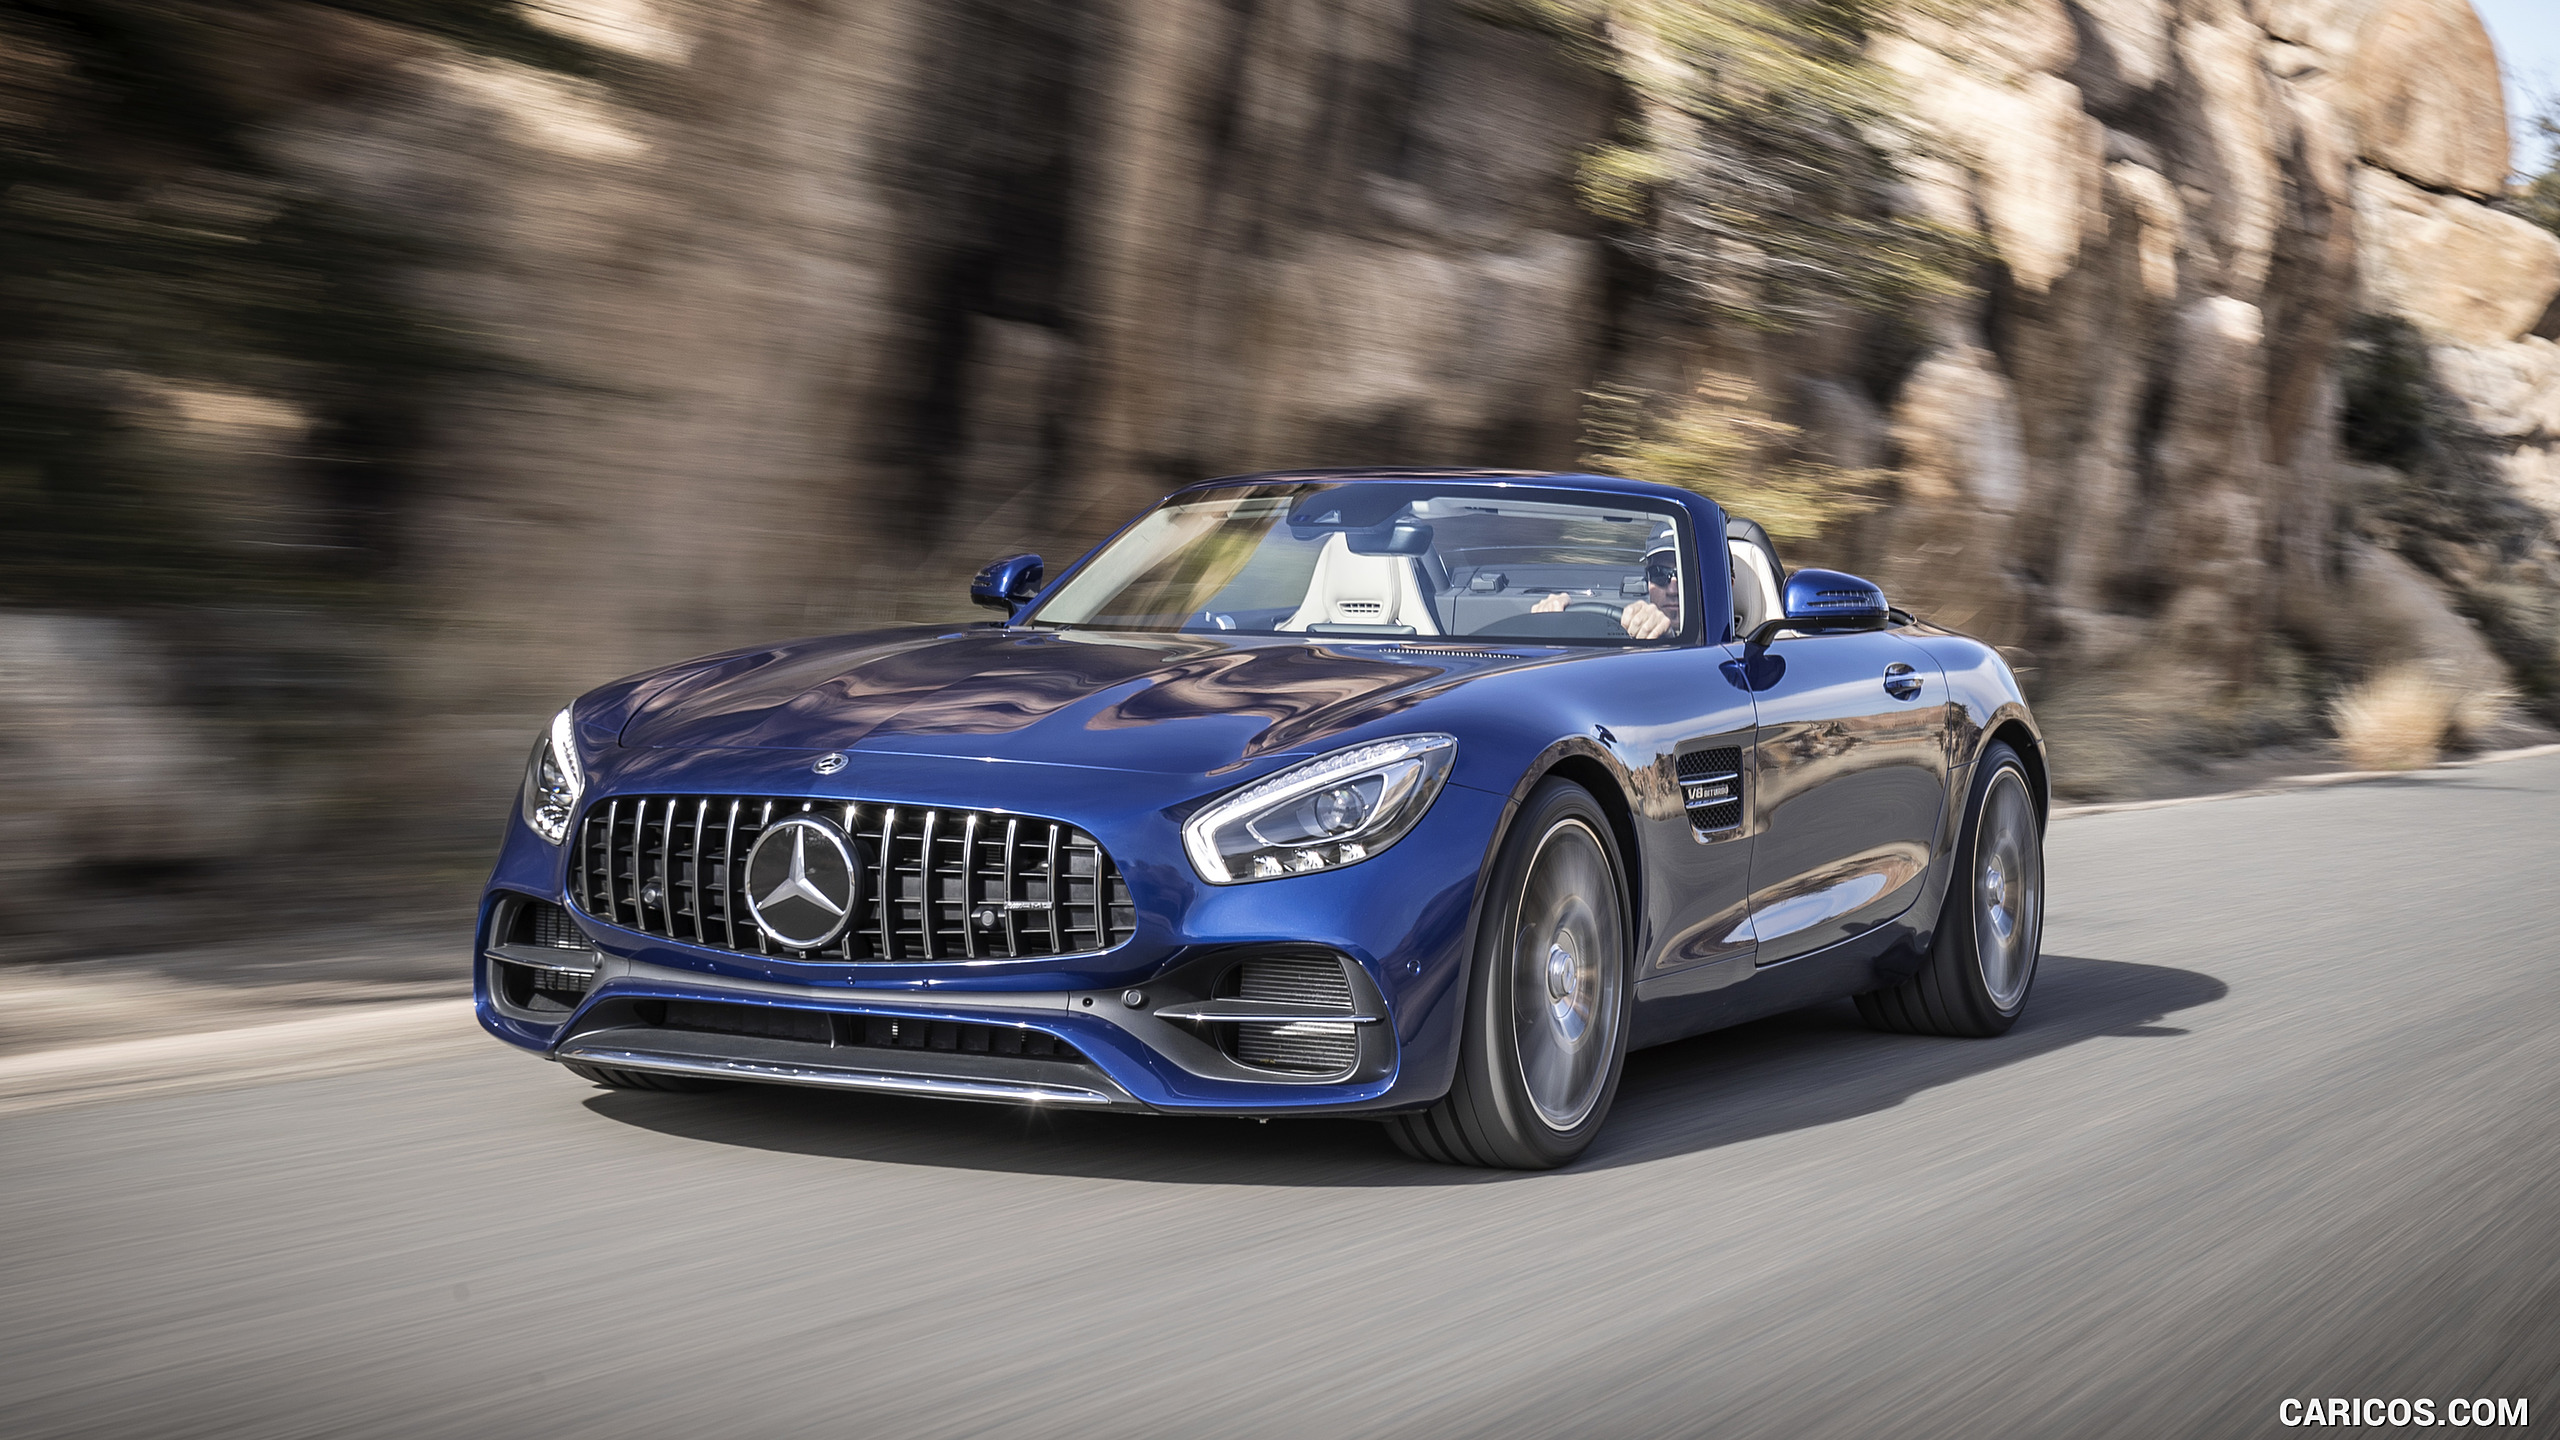 2018 Mercedes-AMG GT Roadster - Front Three-Quarter, #138 of 350